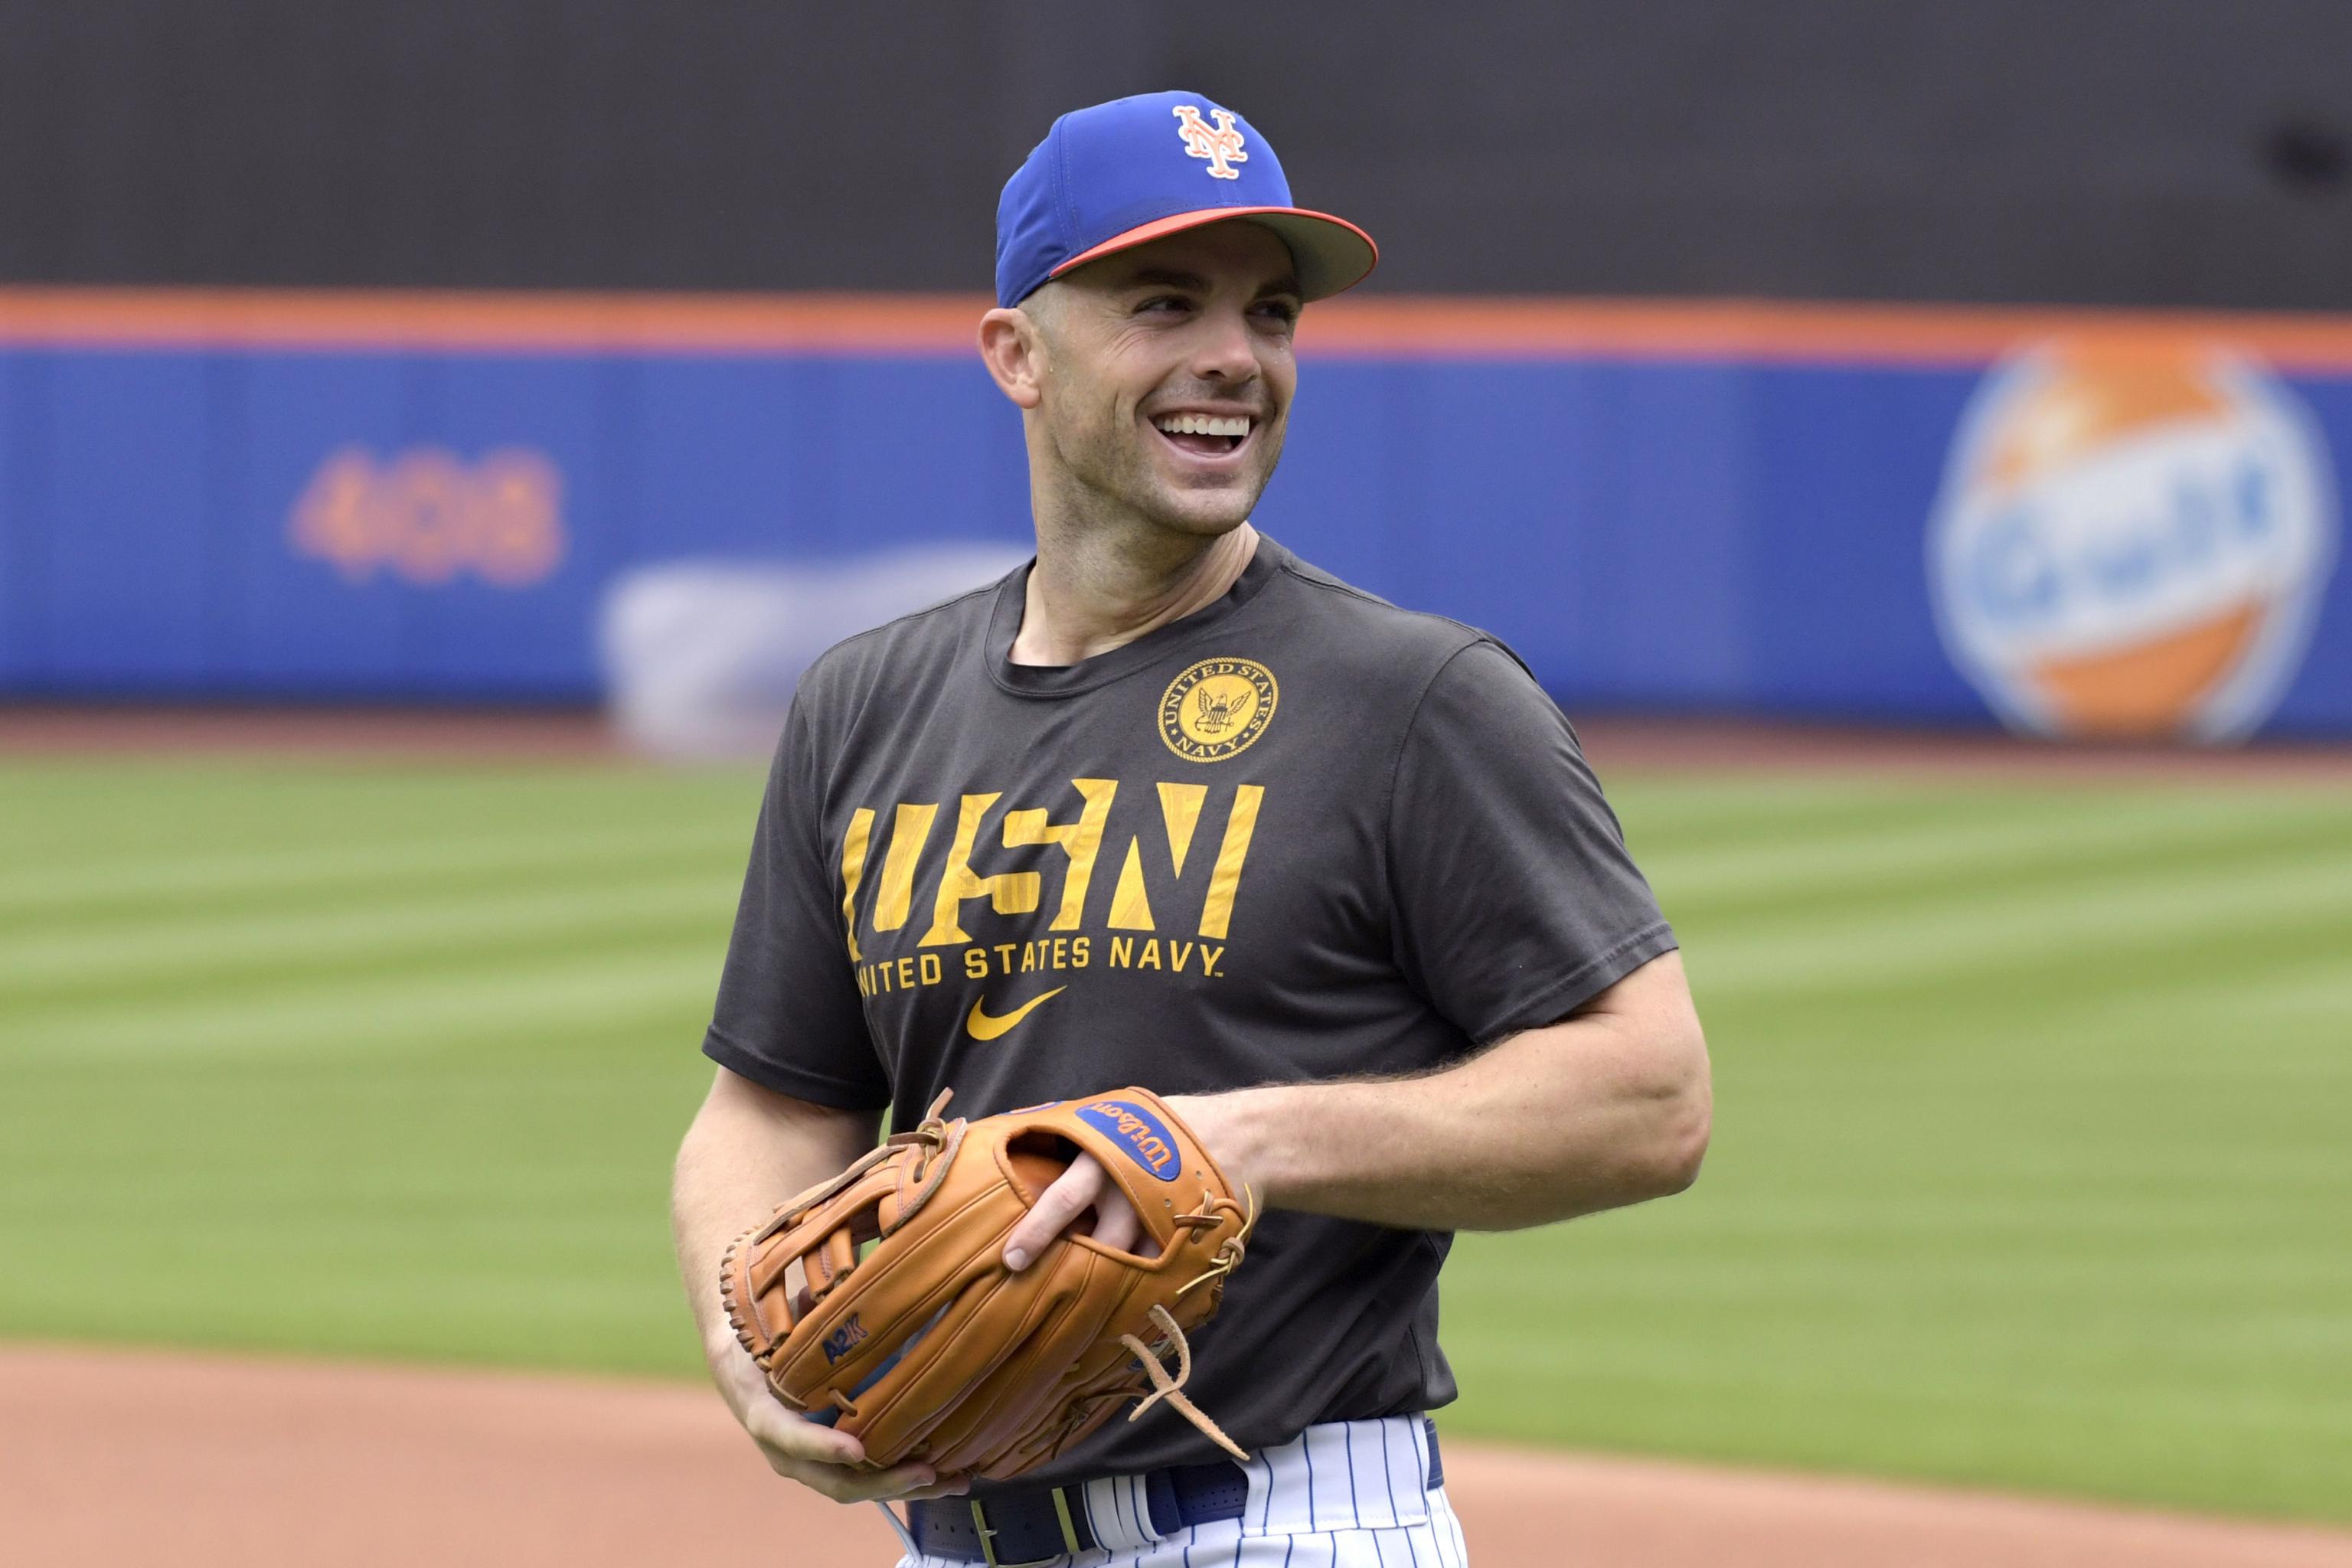 Injuries force Mets to use David Wright at shortstop - NBC Sports